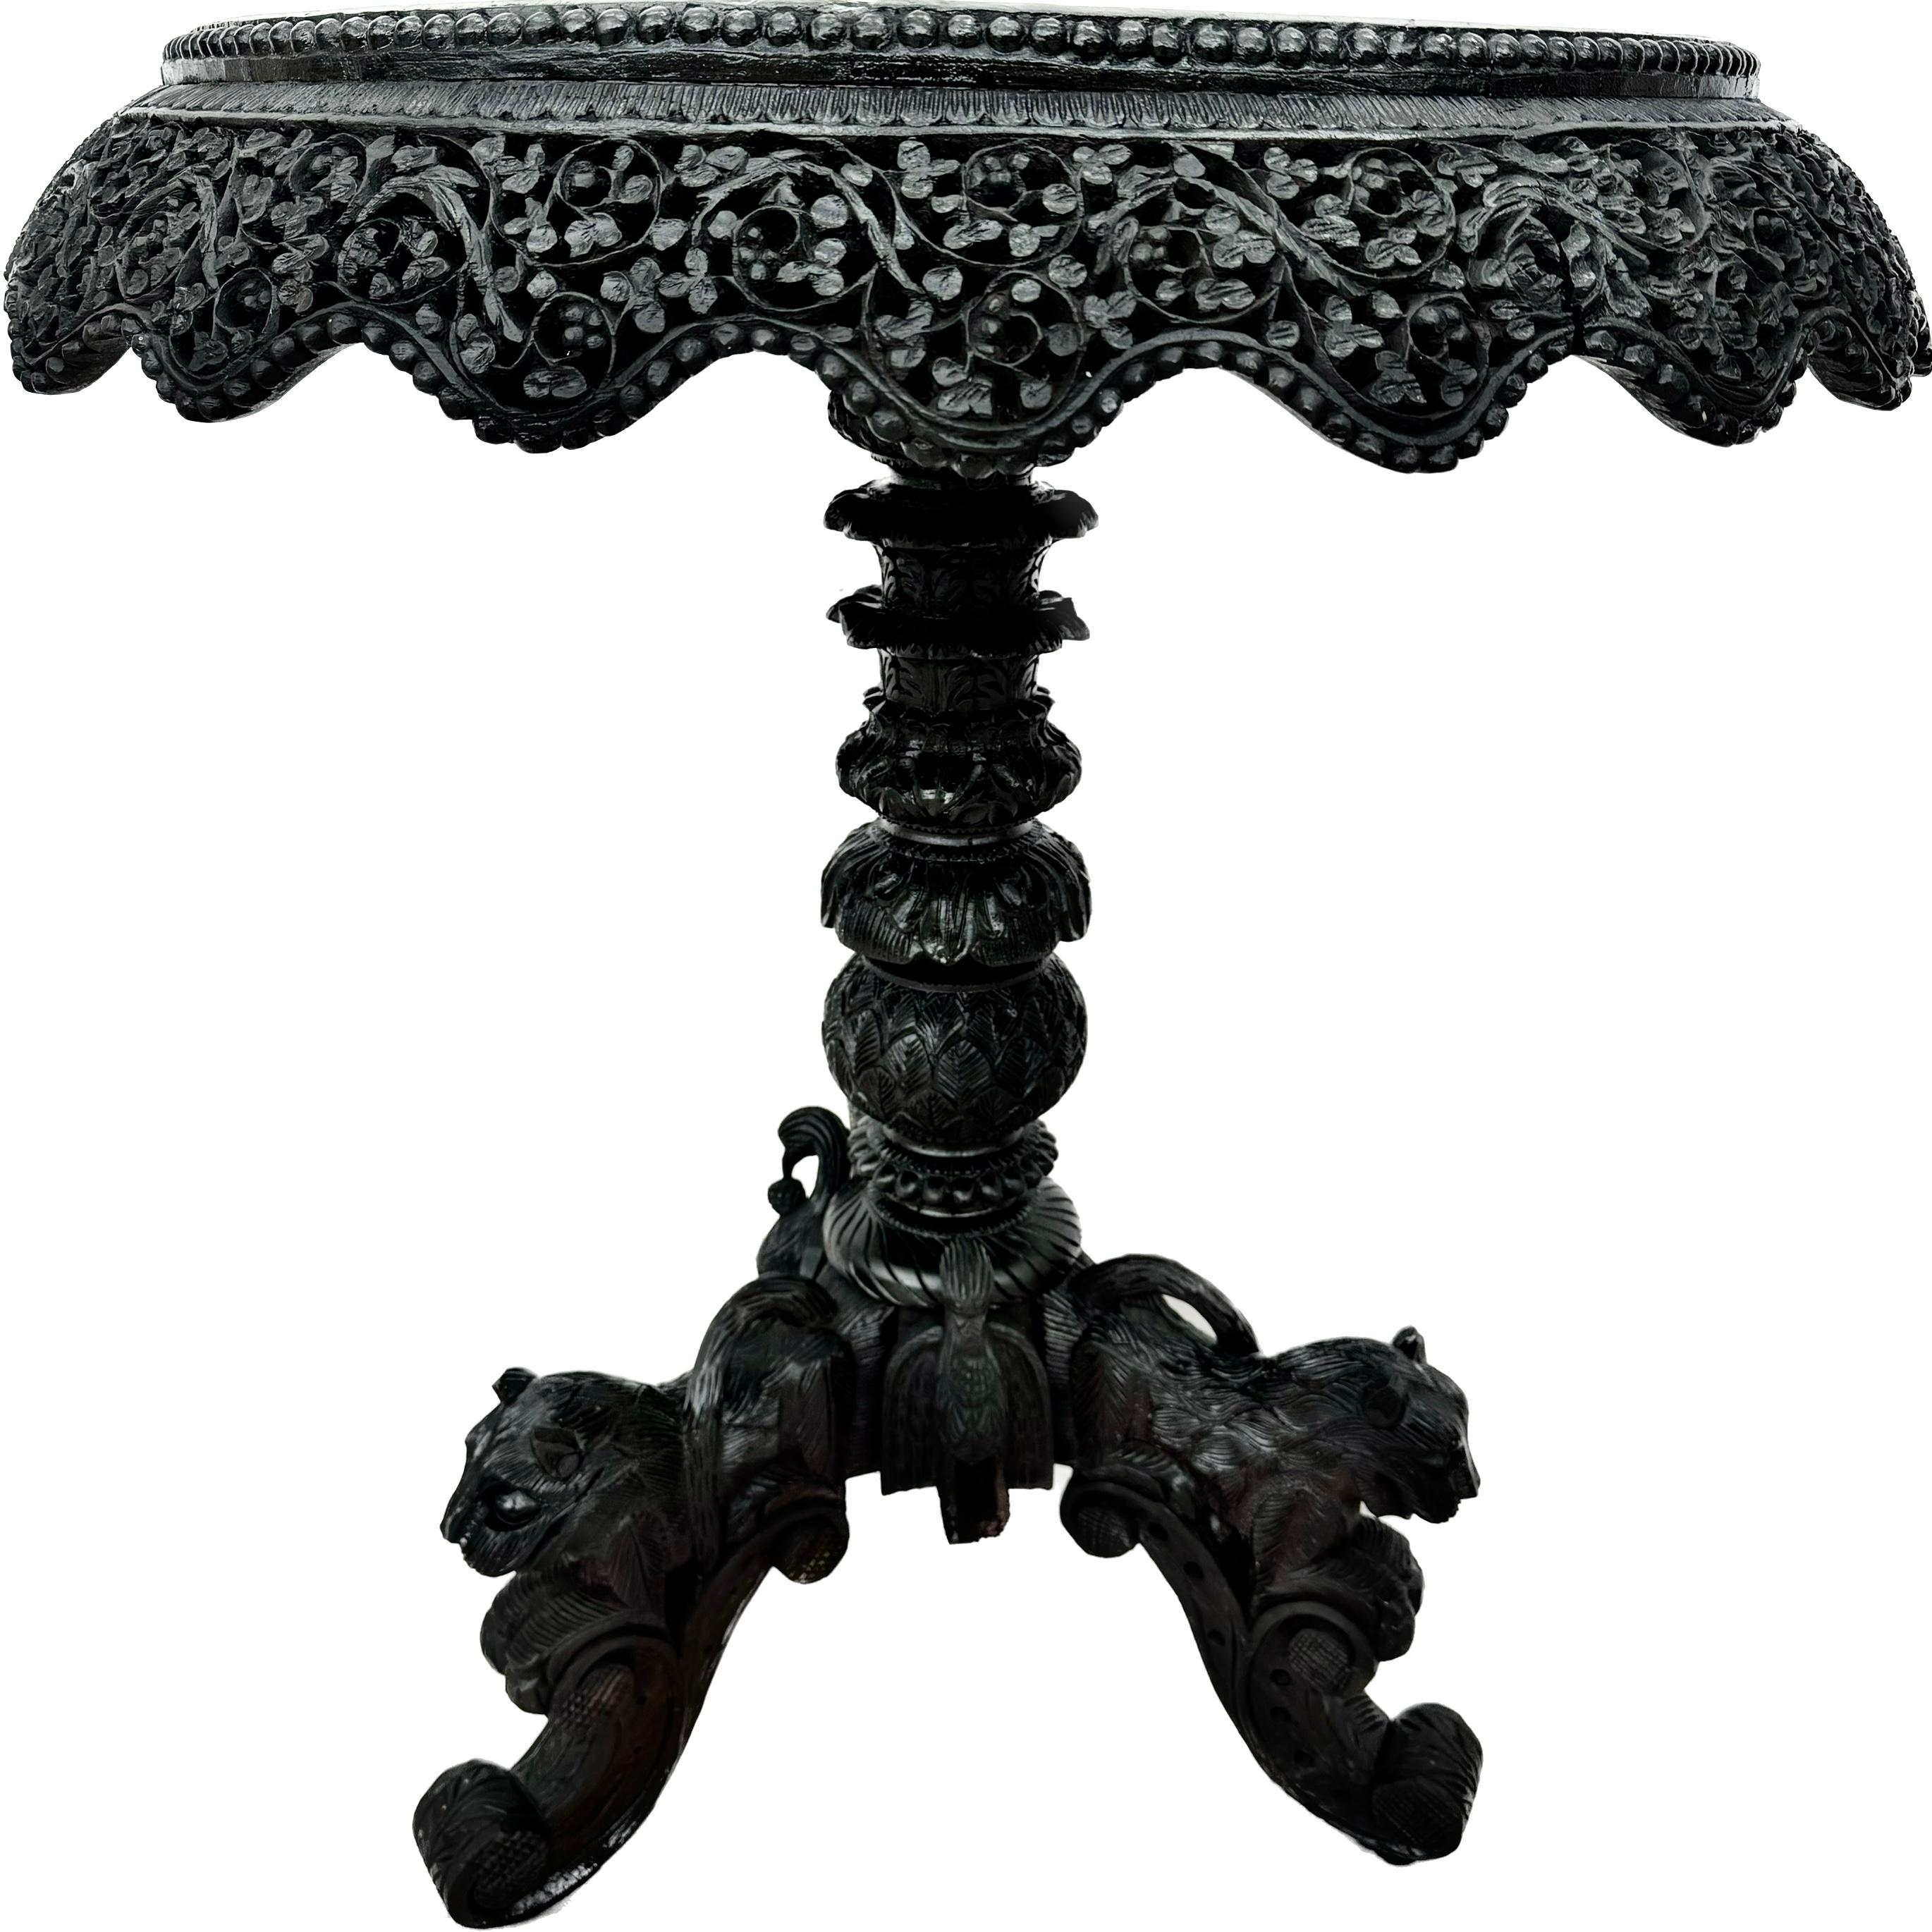 Exquisite 19th Century Carved Burmese Anglo-Indian round side table. Table features an intricately carved and filigreed apron with a pedestal base. Base is ornamented with carved tiger heads on tripod legs. 